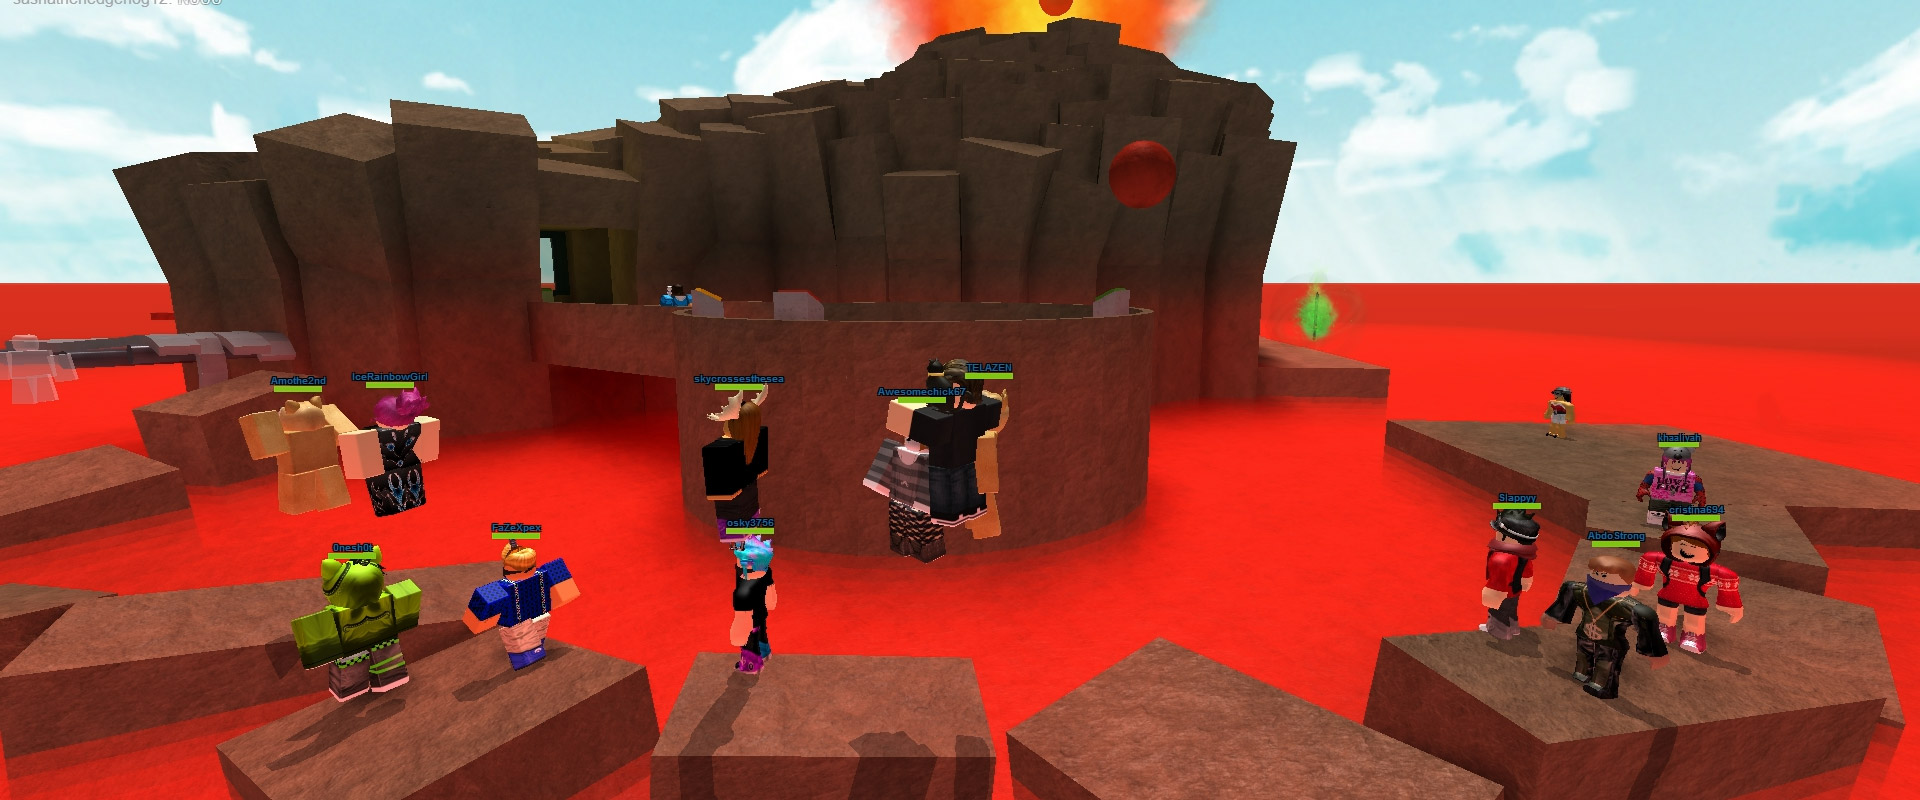 Make Your Play Inside The World Of Roblox Creativity Roblox Blog